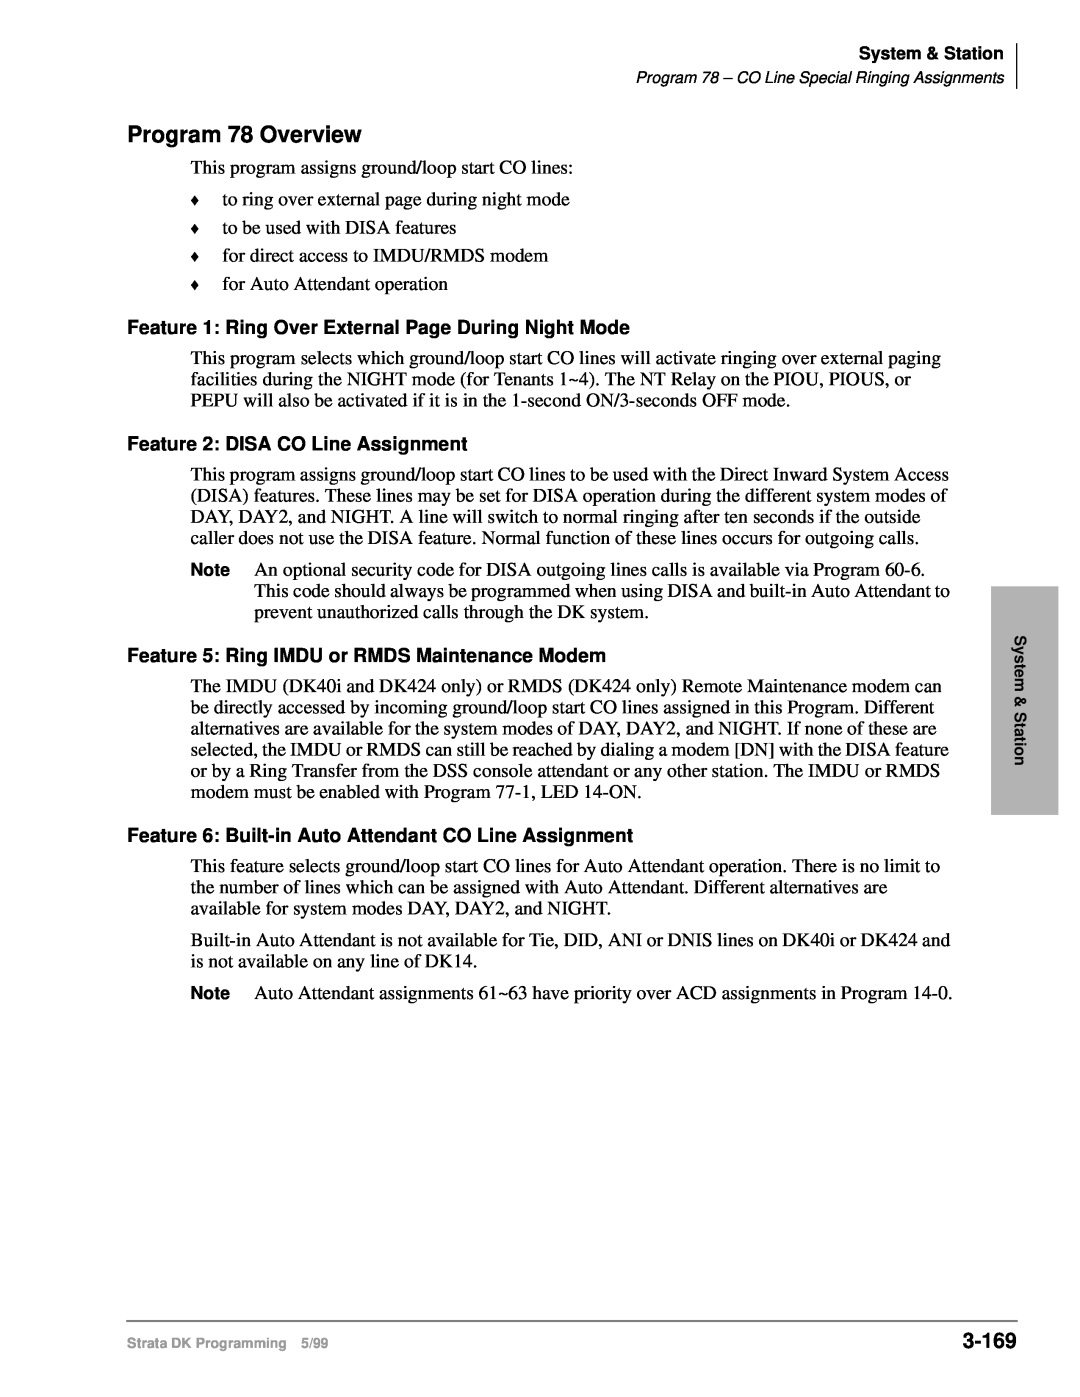 Toshiba dk14 manual Program 78 Overview, 3-169, Feature 2: DISA CO Line Assignment 